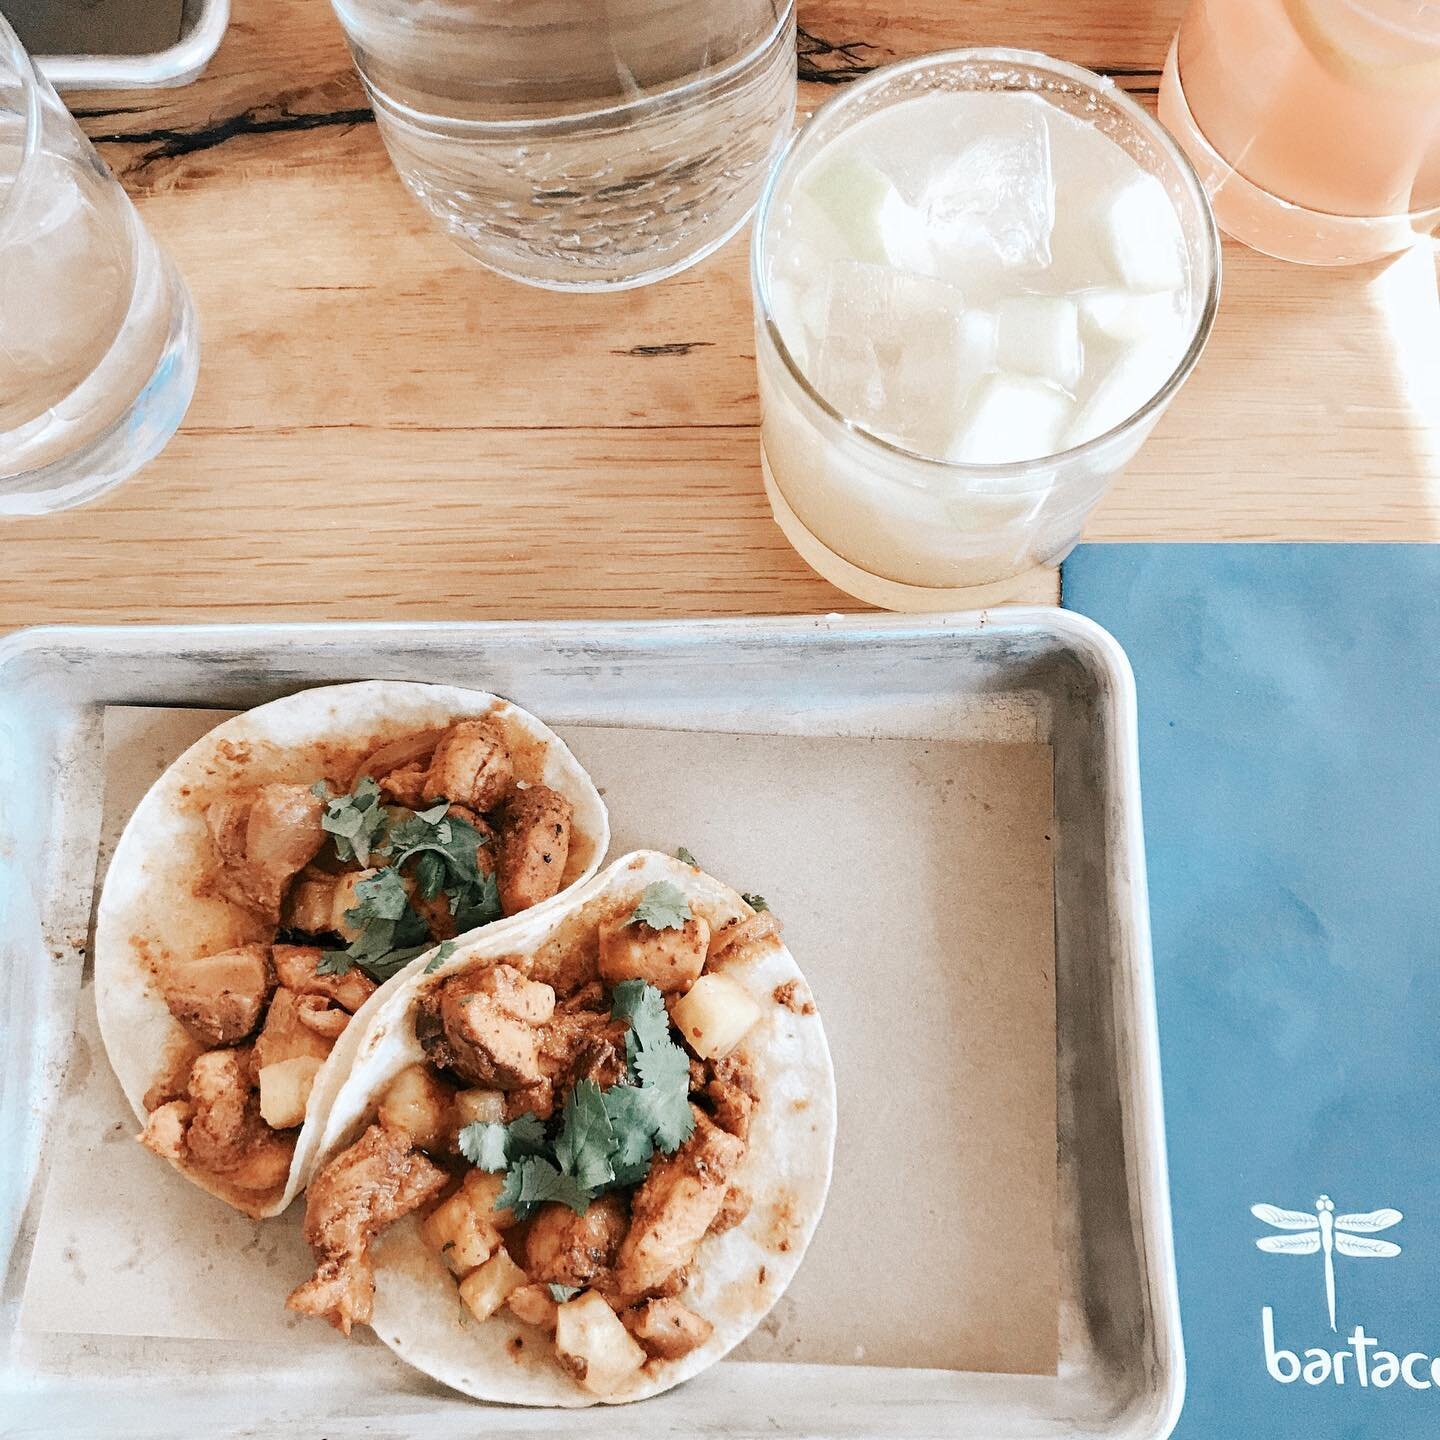 @bartacolife, please accept this photo as my formal complaint for removing al pastor from the menu. I&rsquo;m heartbroken, but I still love you.